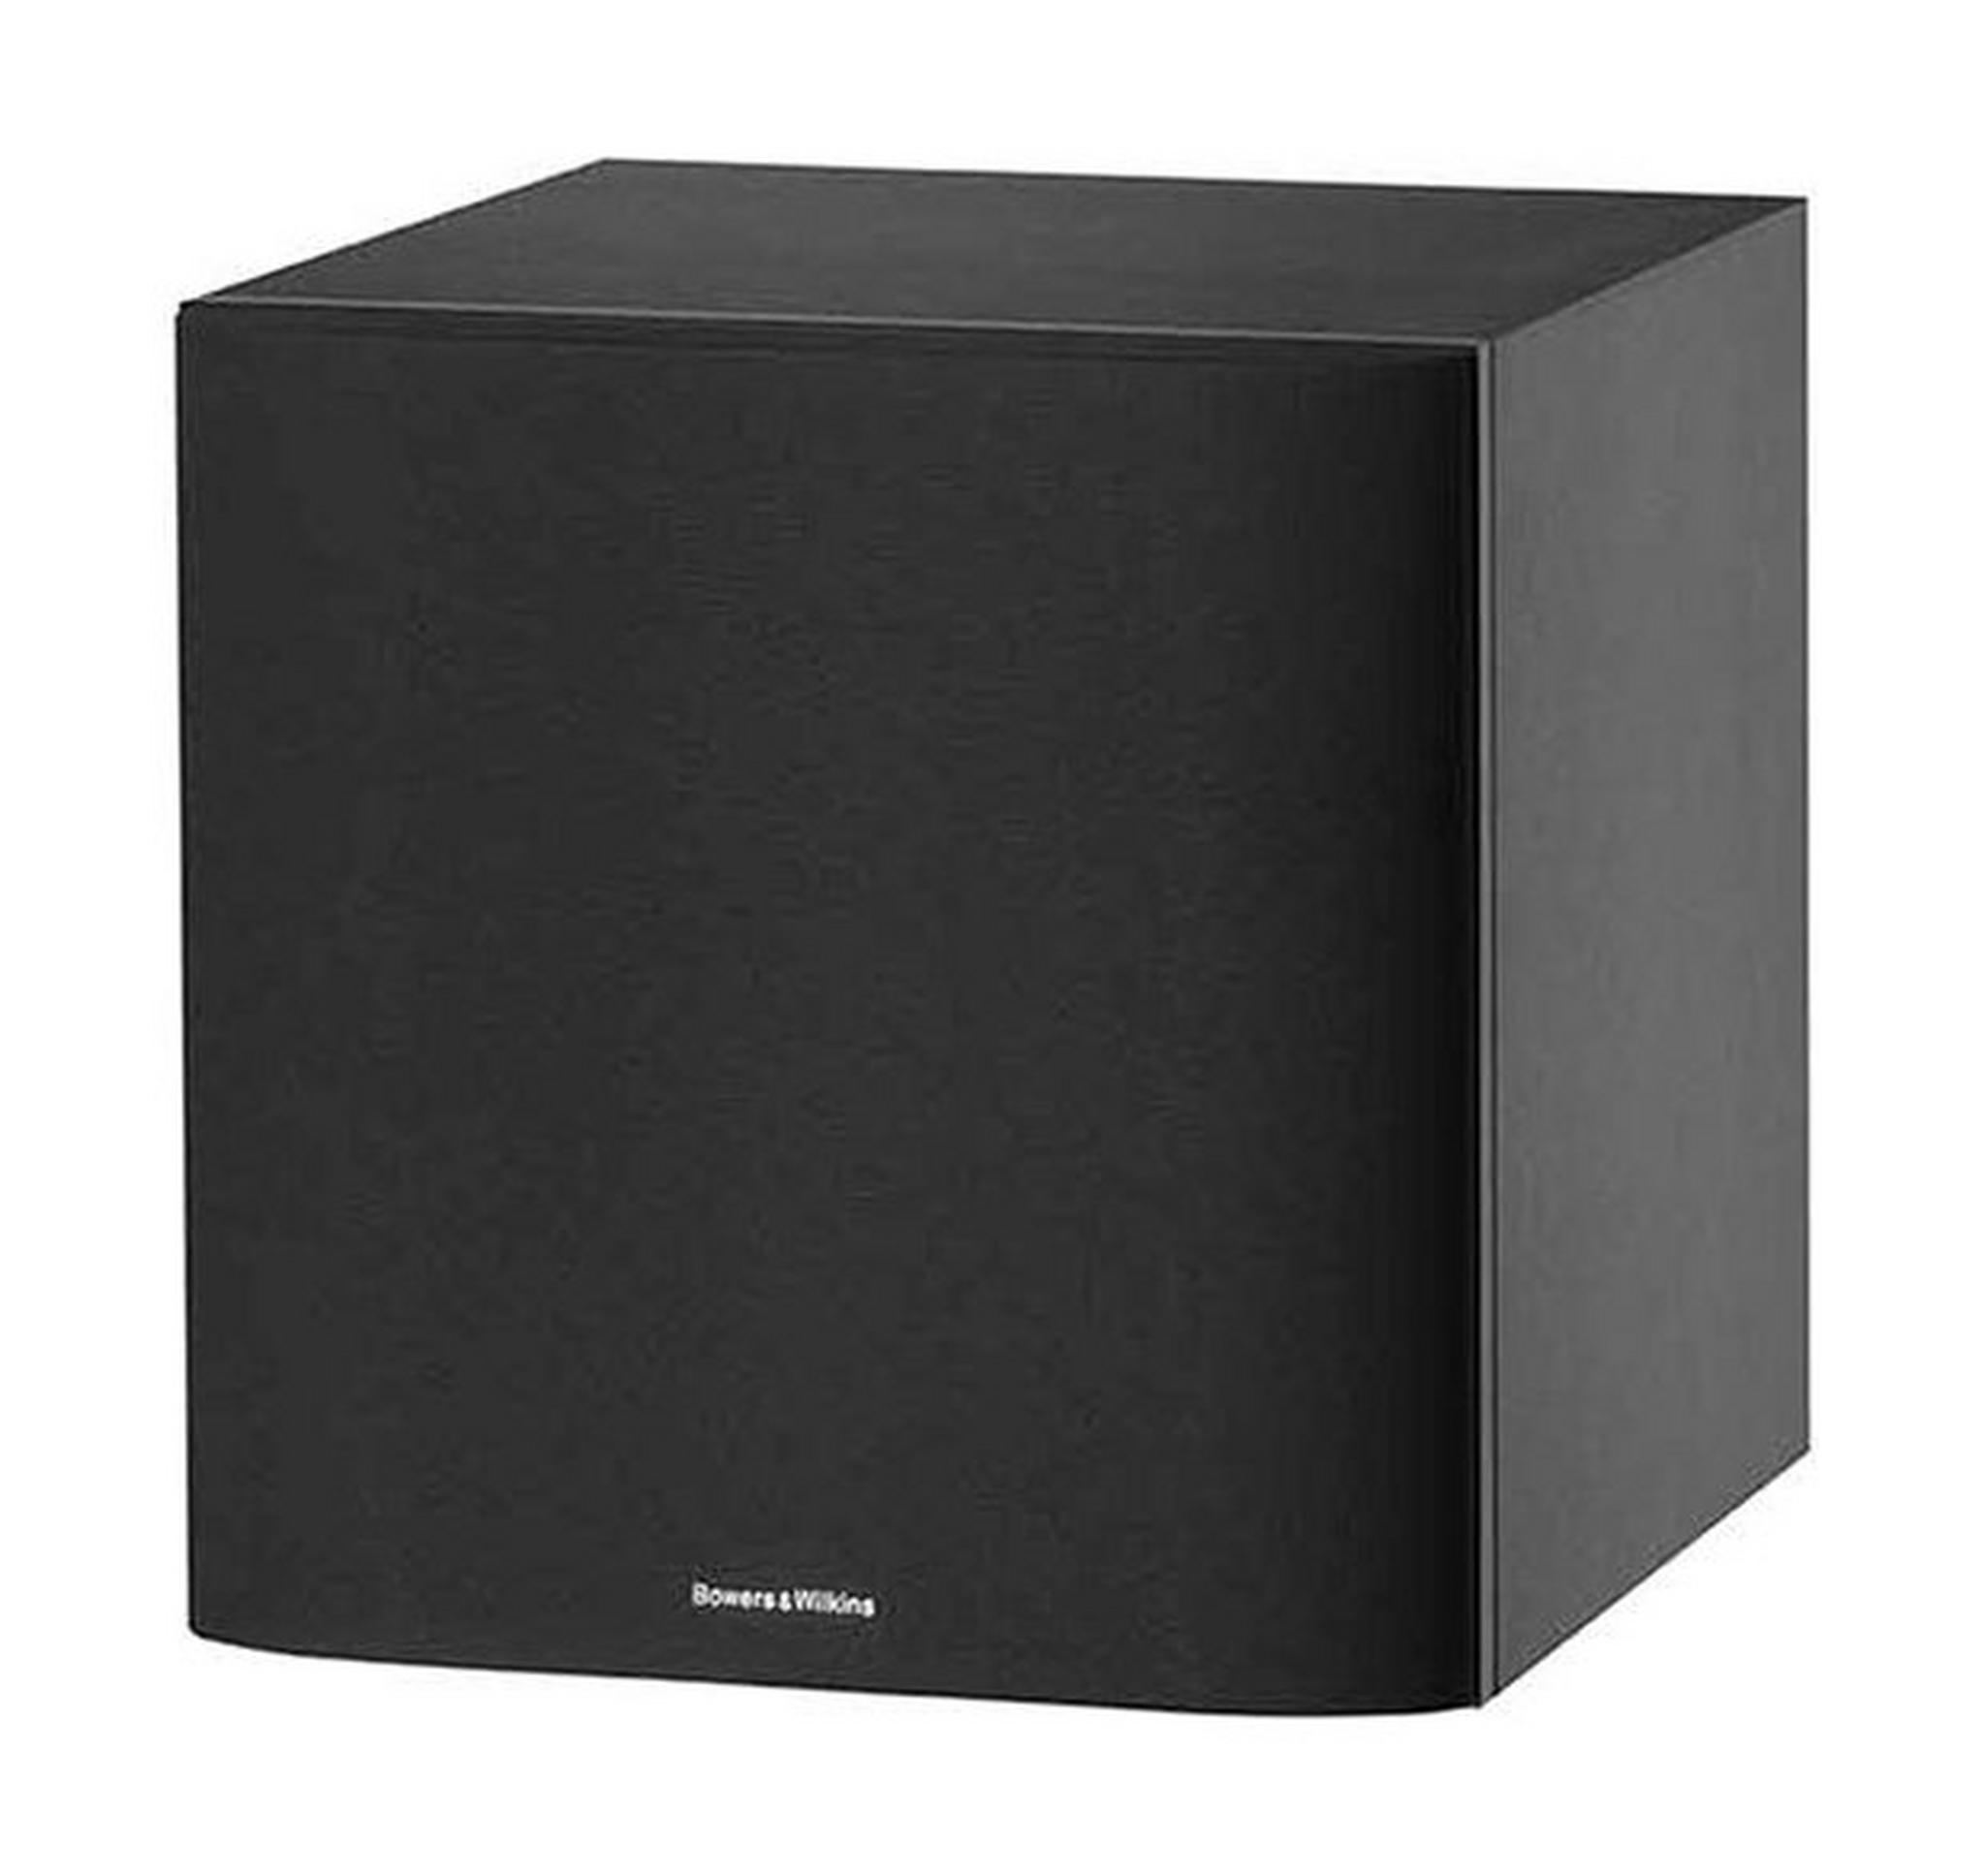 Bowers & Wilkins 600 Series 10" 500W Powered Subwoofer - Matte Black